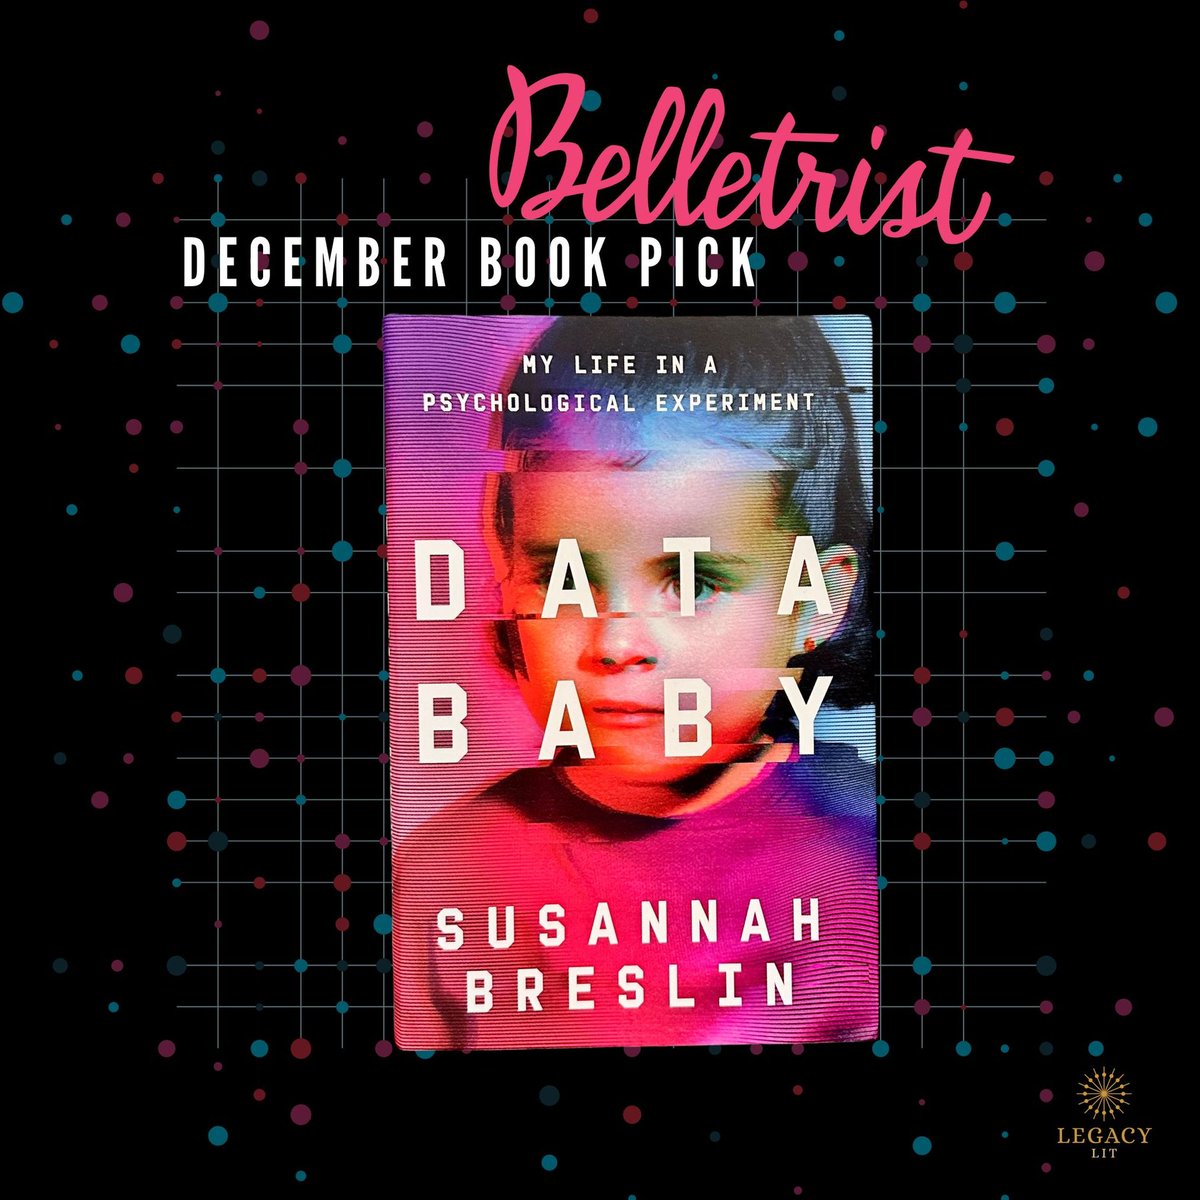 🎉📖✨ DATA BABY by @susannahbreslin is the @Belletristbooks December Book Pick! #bookclubpick #mustread